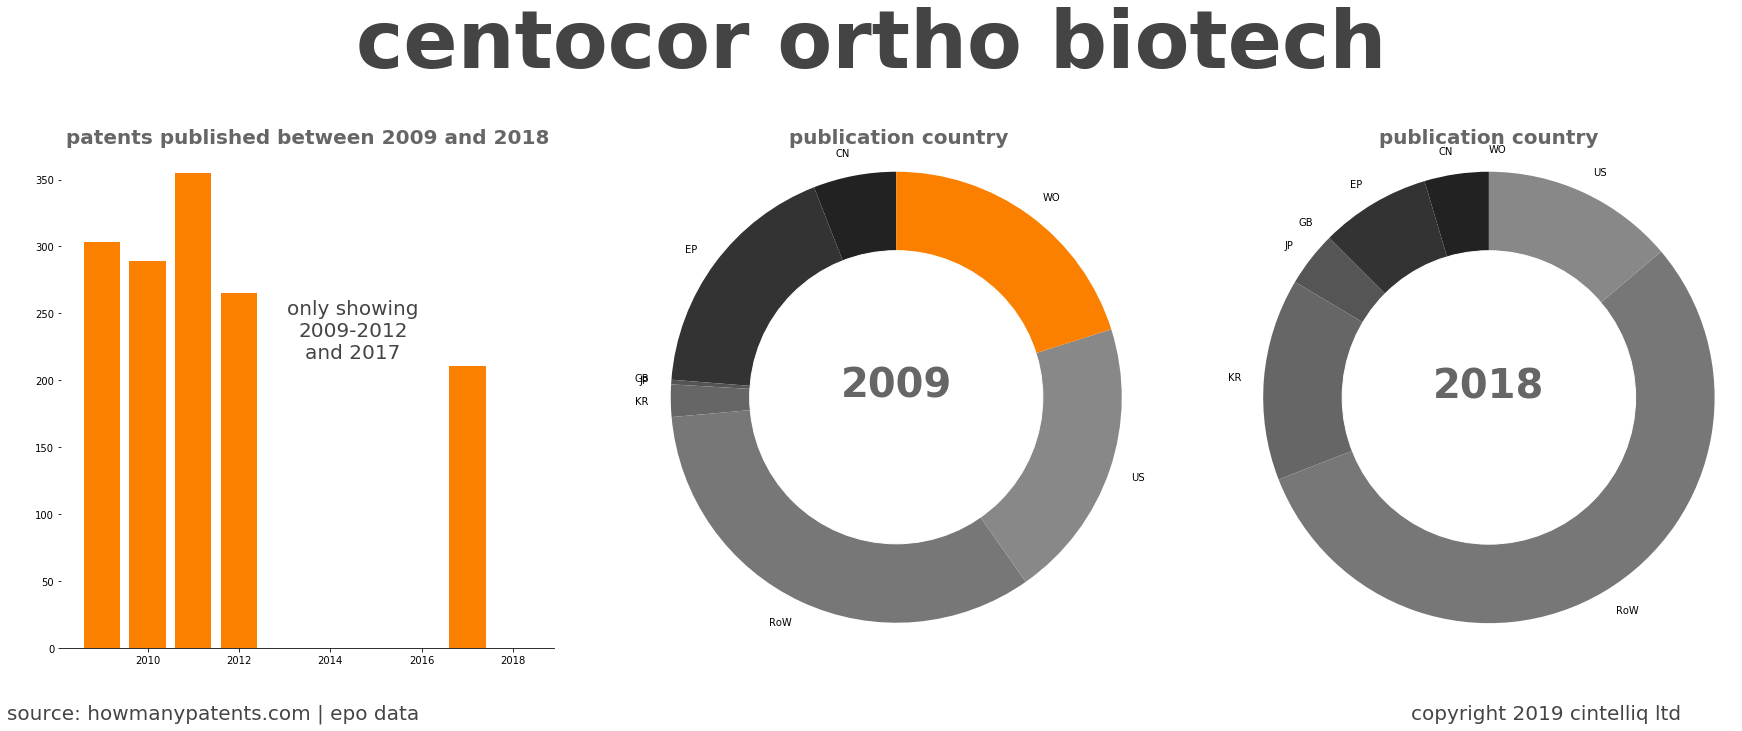 summary of patents for Centocor Ortho Biotech